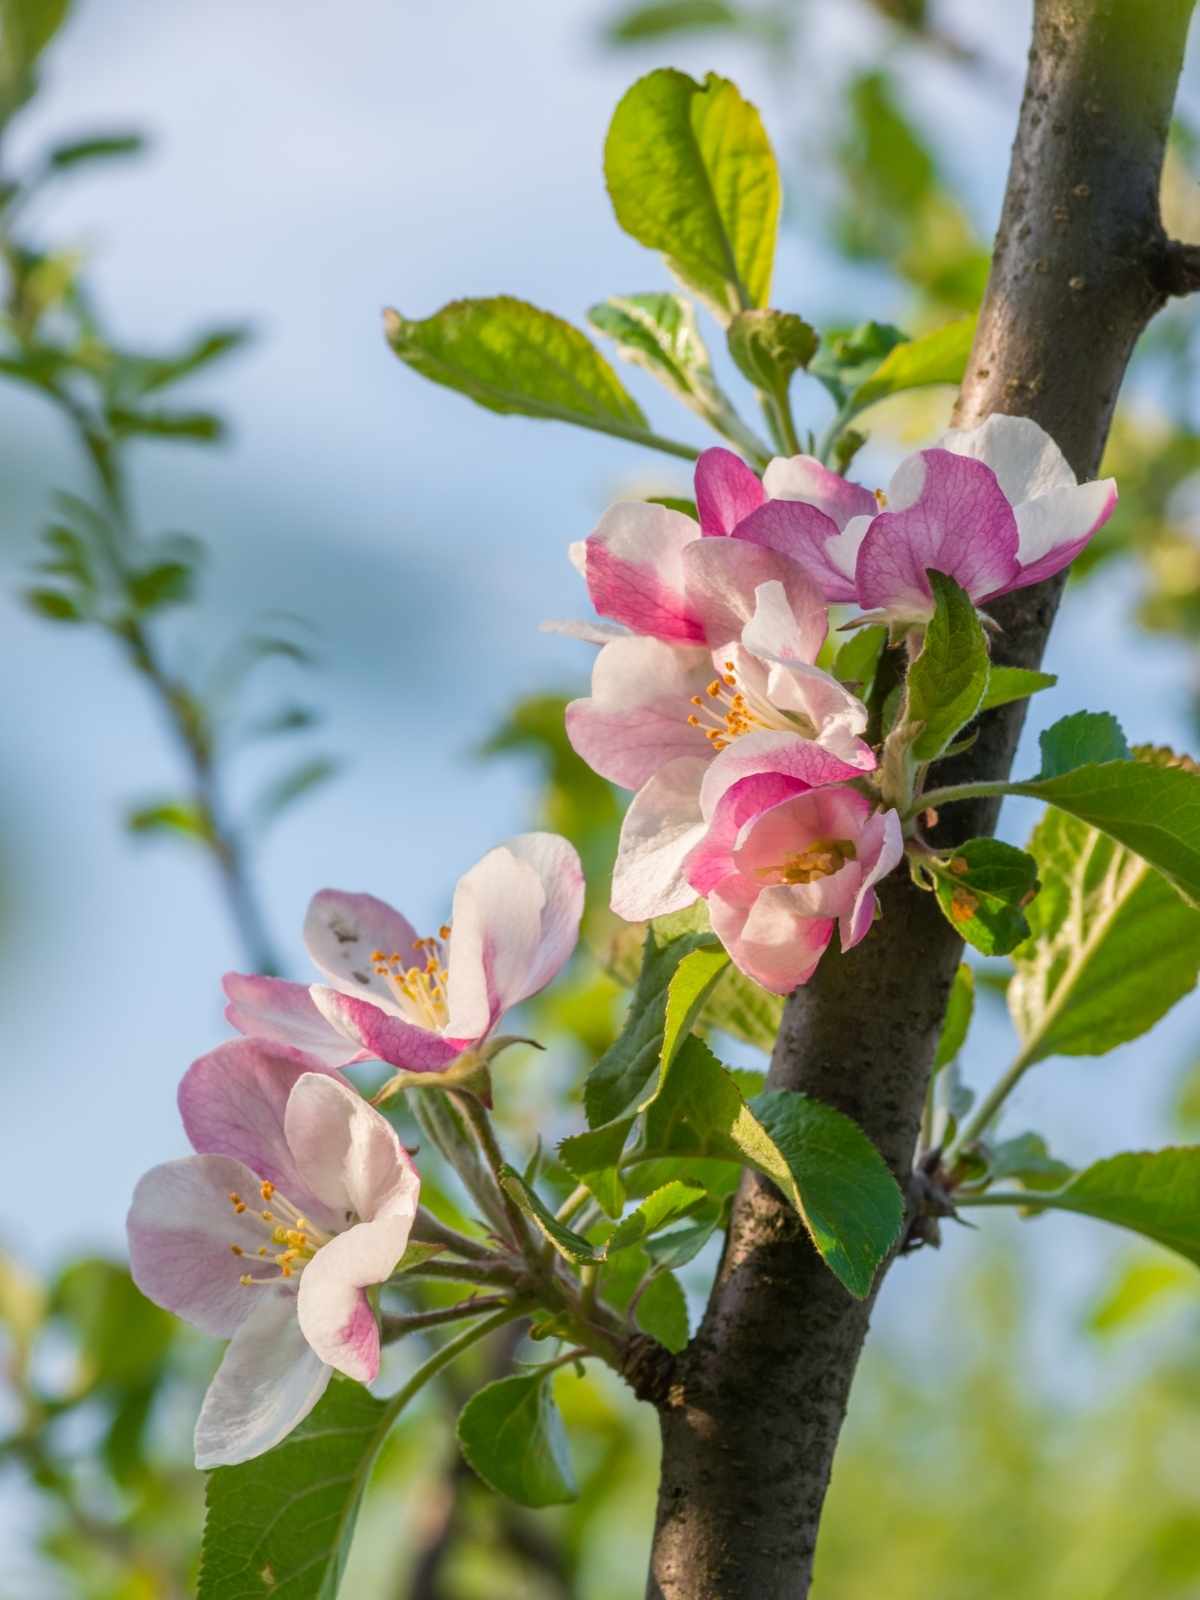 light pink and white apple blooms on a branch with green leaves